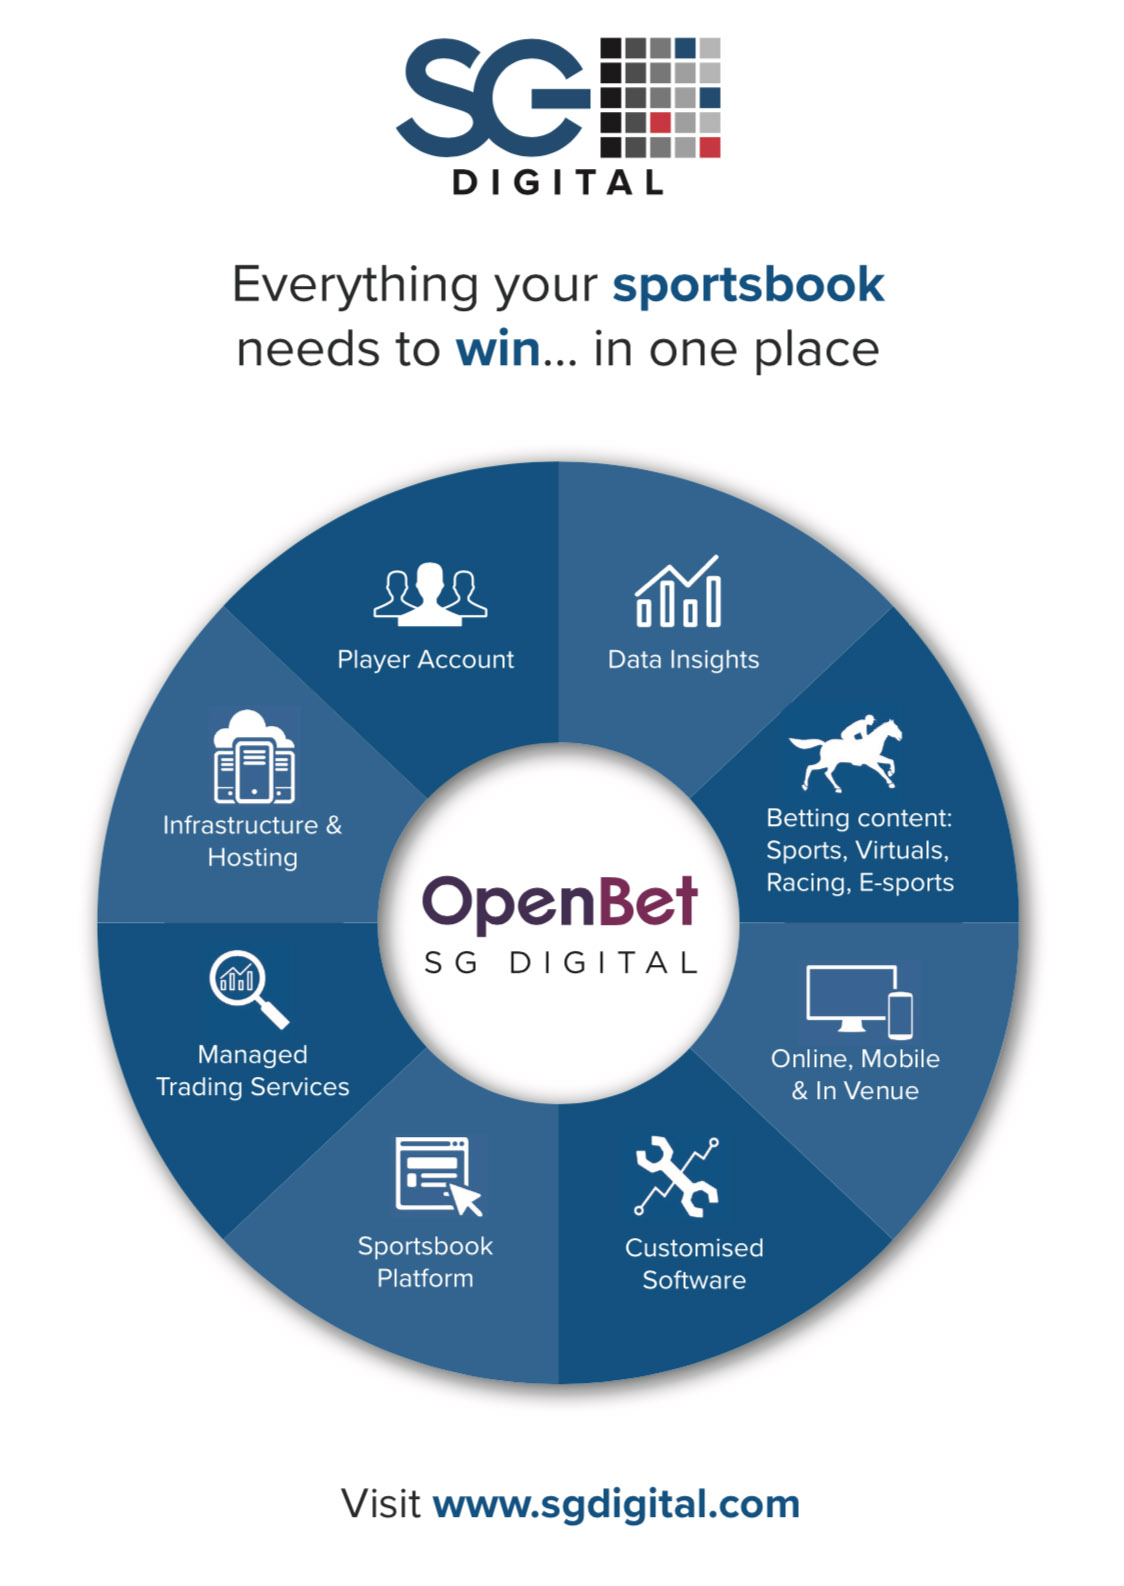 Everything your sportsbook needs to win in one place